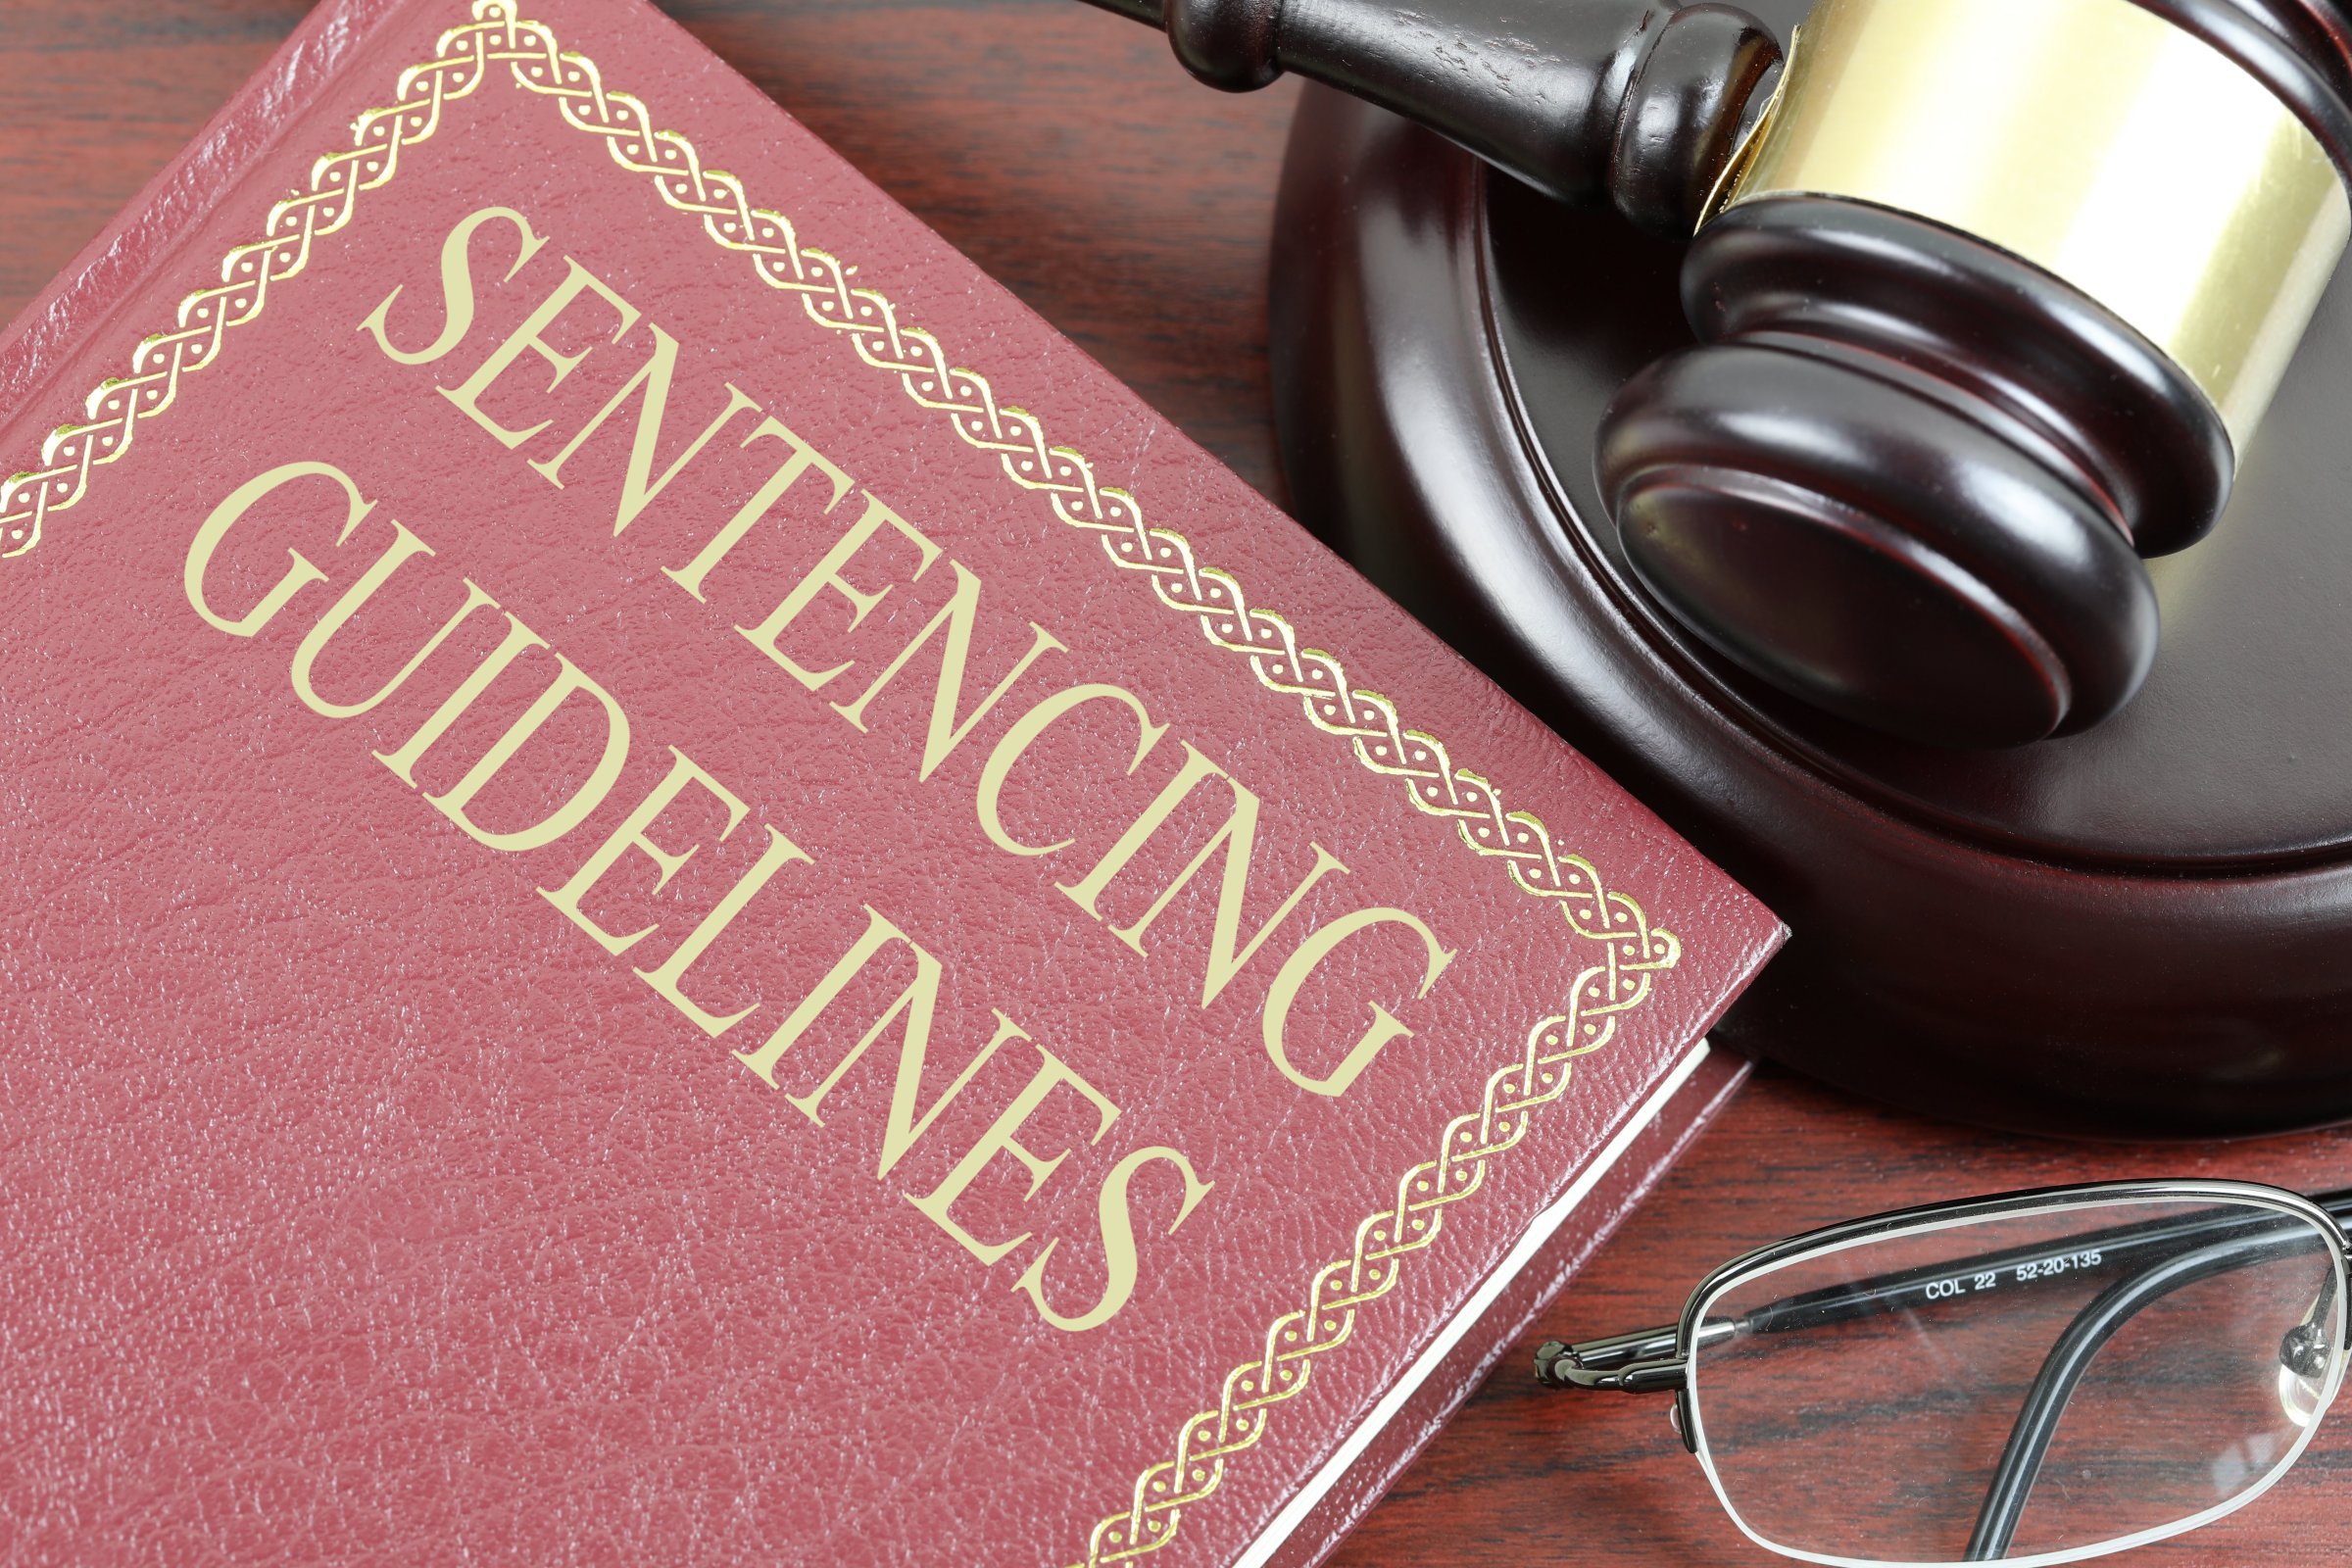 sentencing-guidelines-free-of-charge-creative-commons-law-book-image